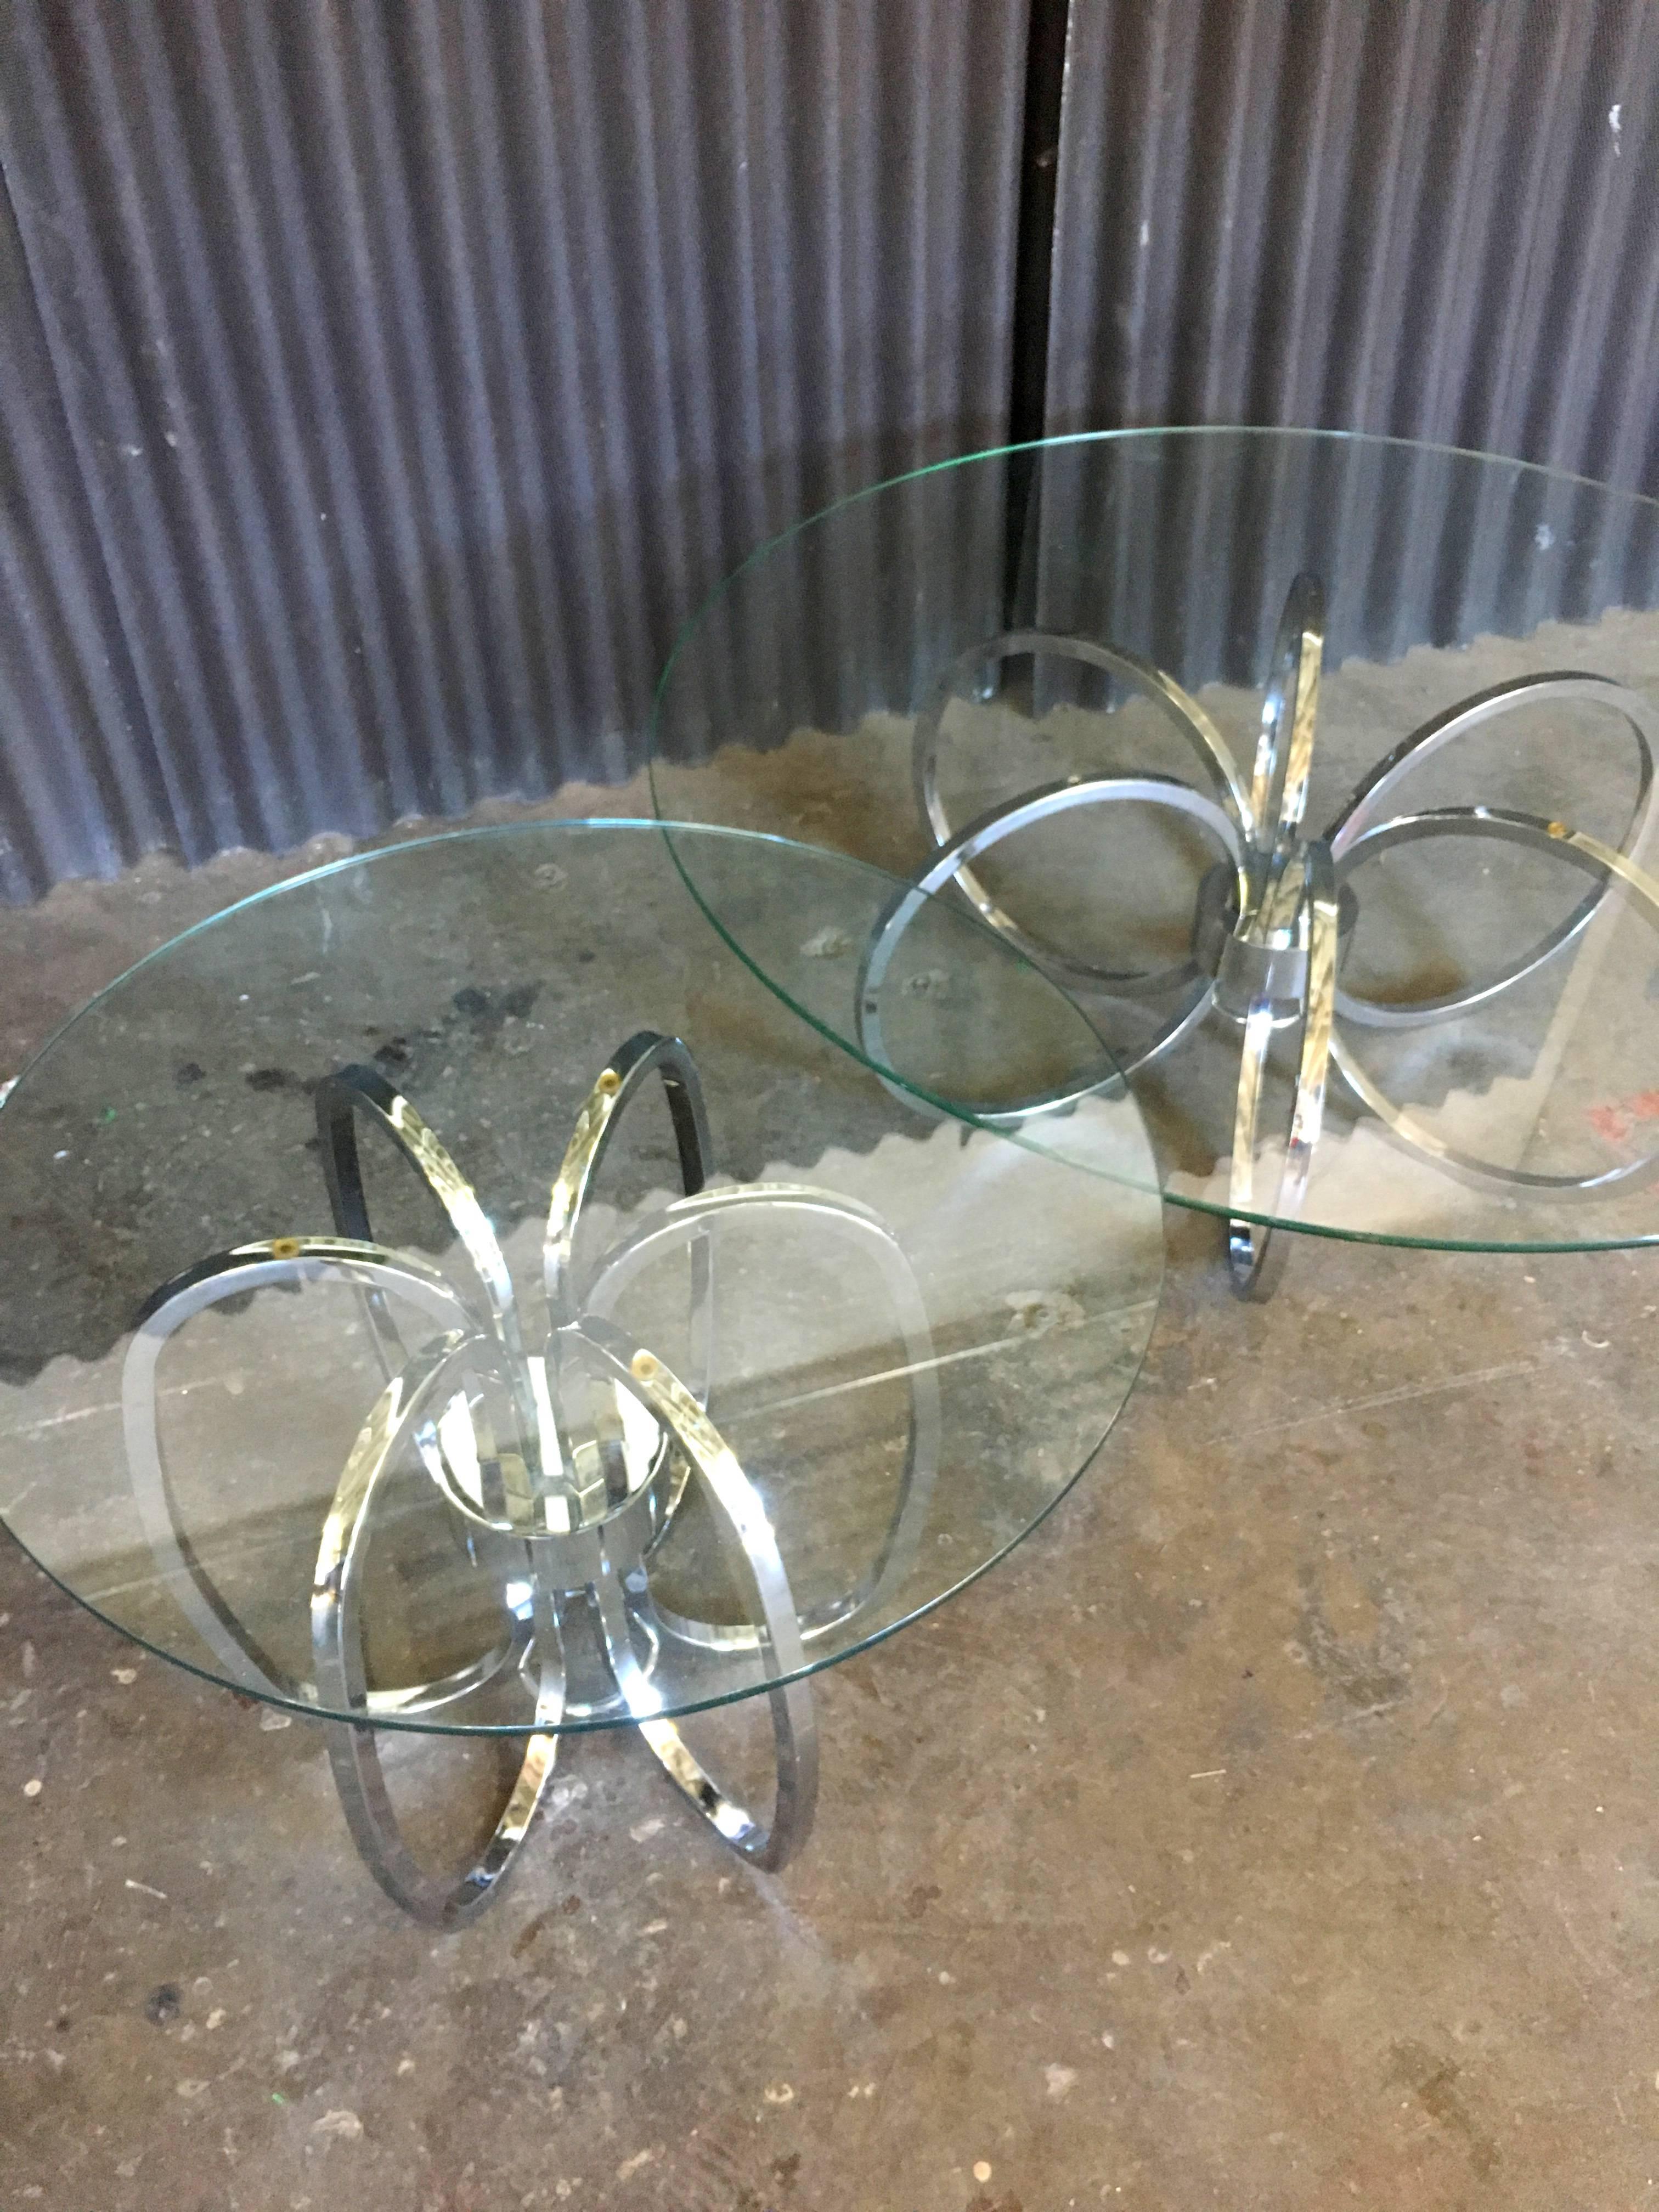 Shiny and beautiful set of chrome tables to add some sparkle to your living room!
Both pieces are in smooth and fantastic condition with no pitting anywhere.
No chips or broken glass either!
Just perfect to give that certain spot a touch of